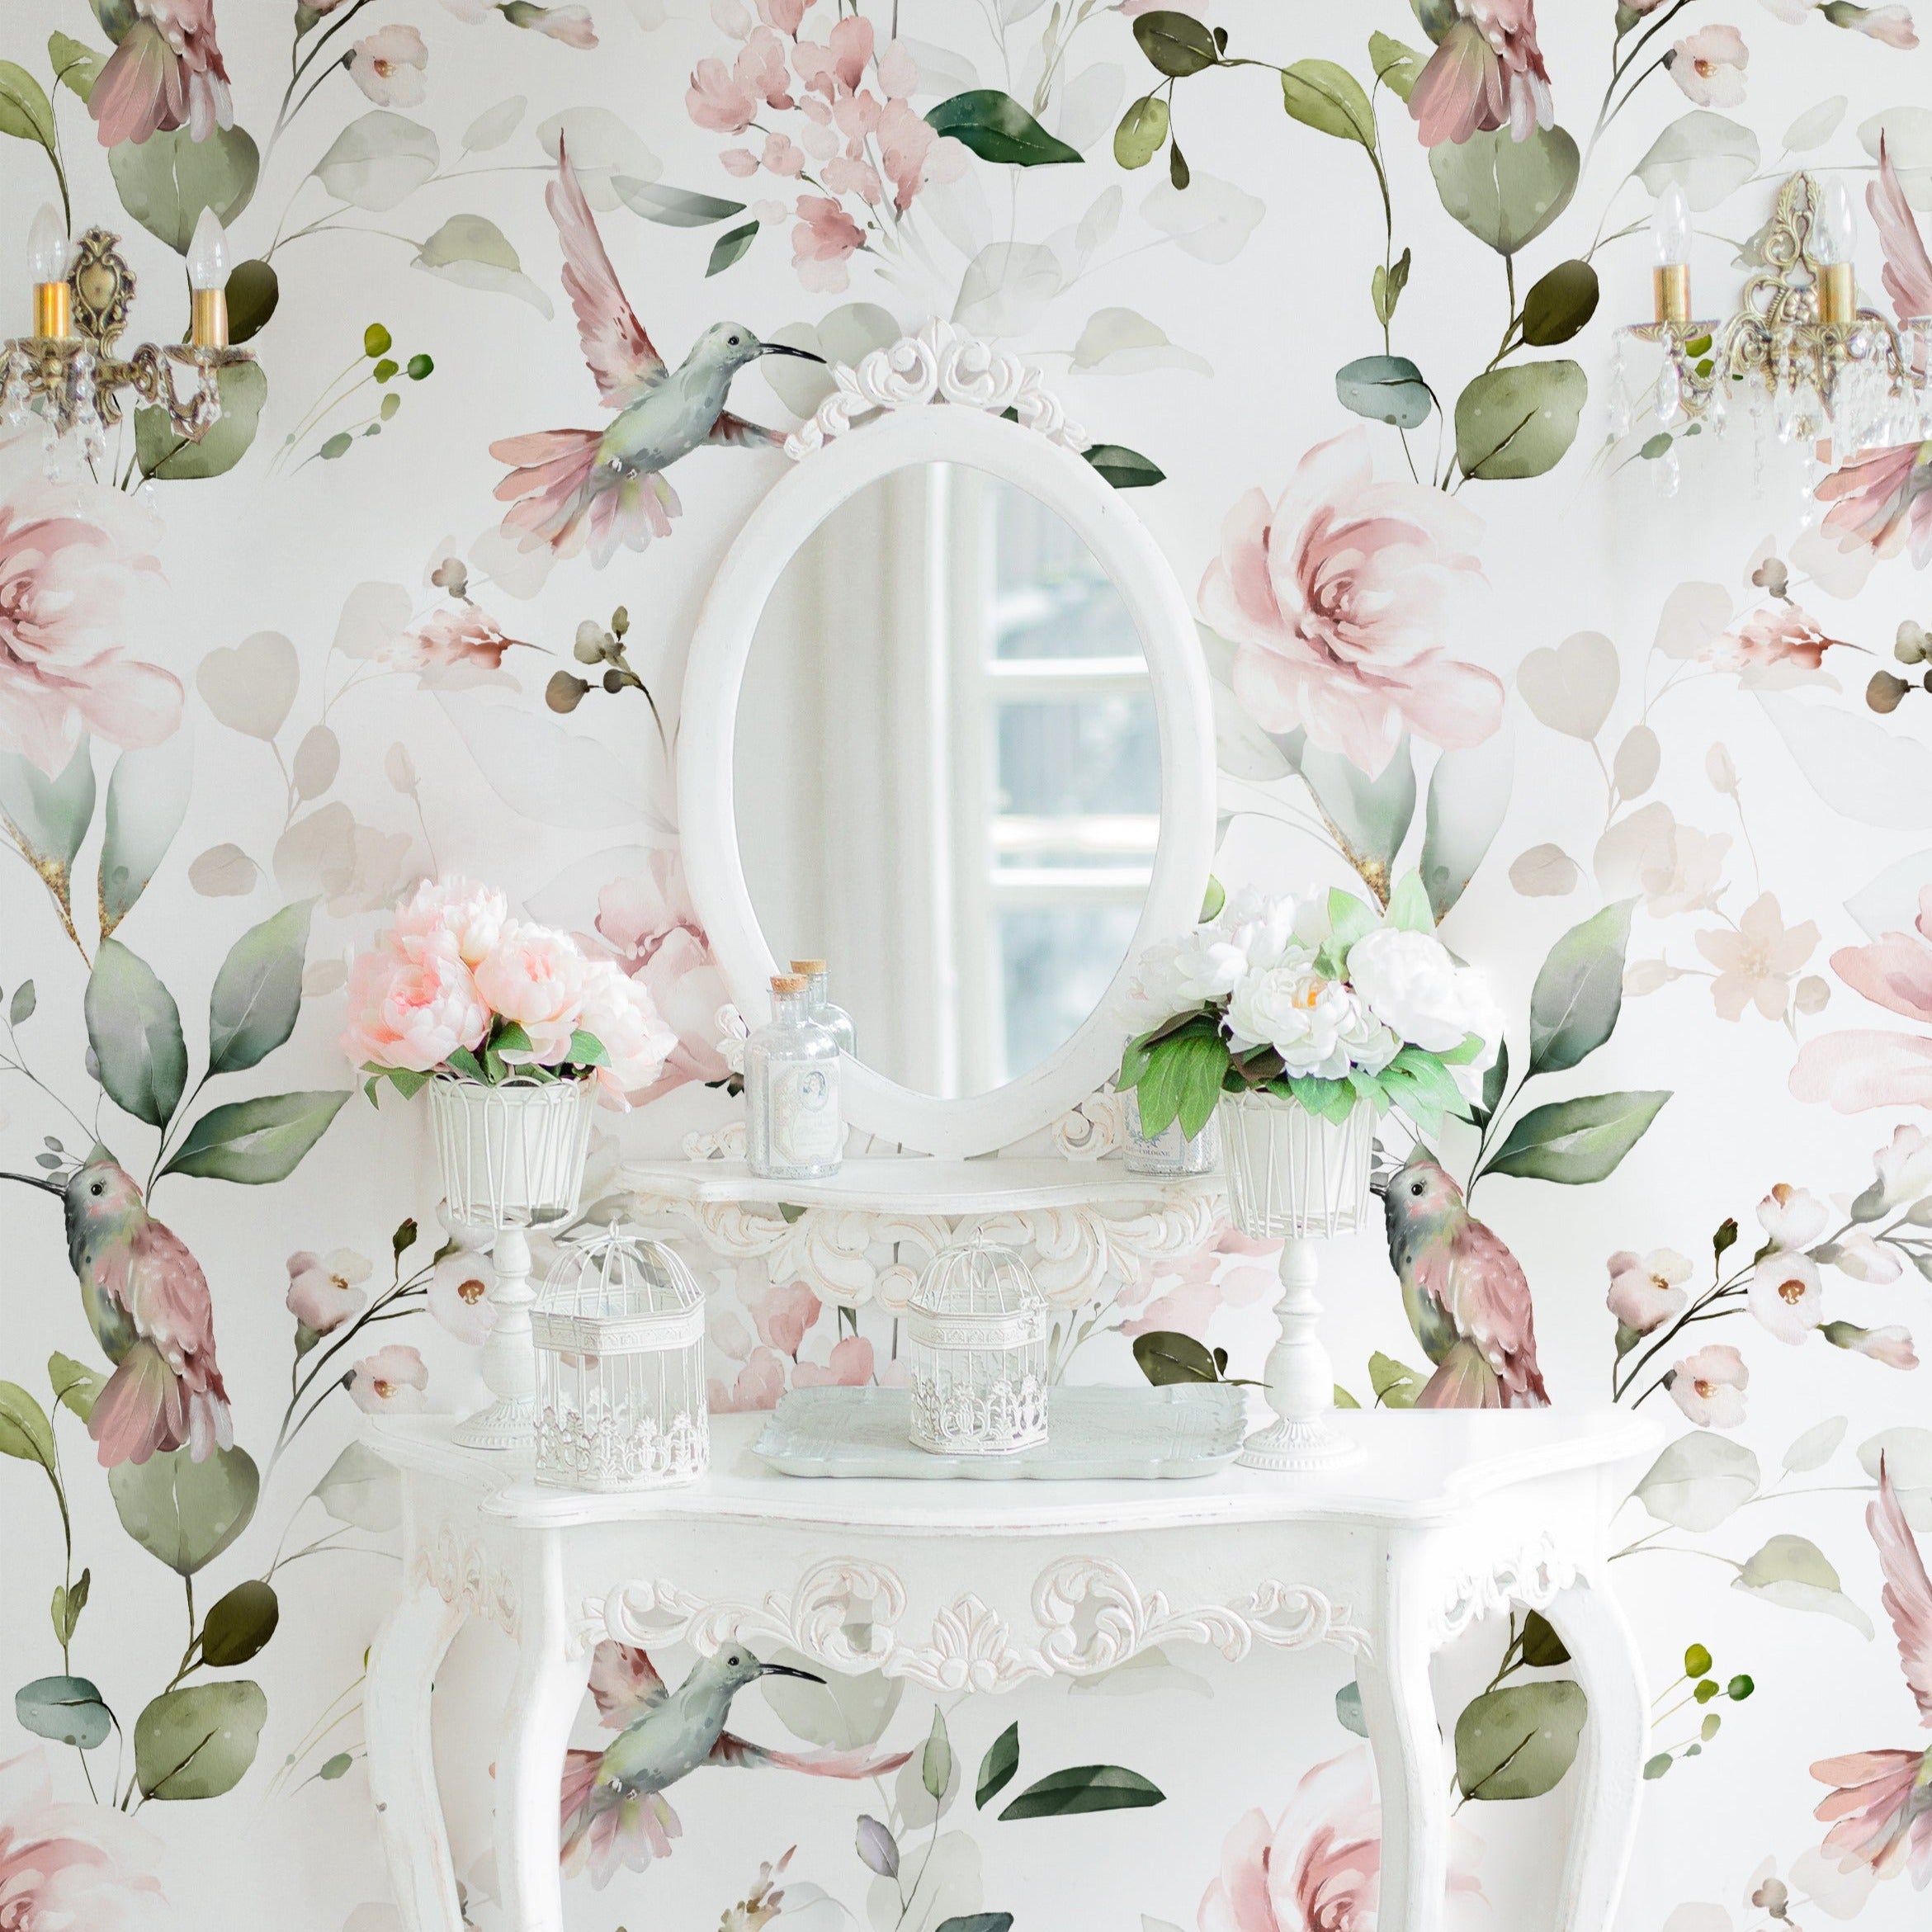 An elegant vanity setup against the 'Watercolour Hummingbird Floral Wallpaper' that features a romantic array of pastel florals and hummingbirds, enhancing the whimsical charm of the space.